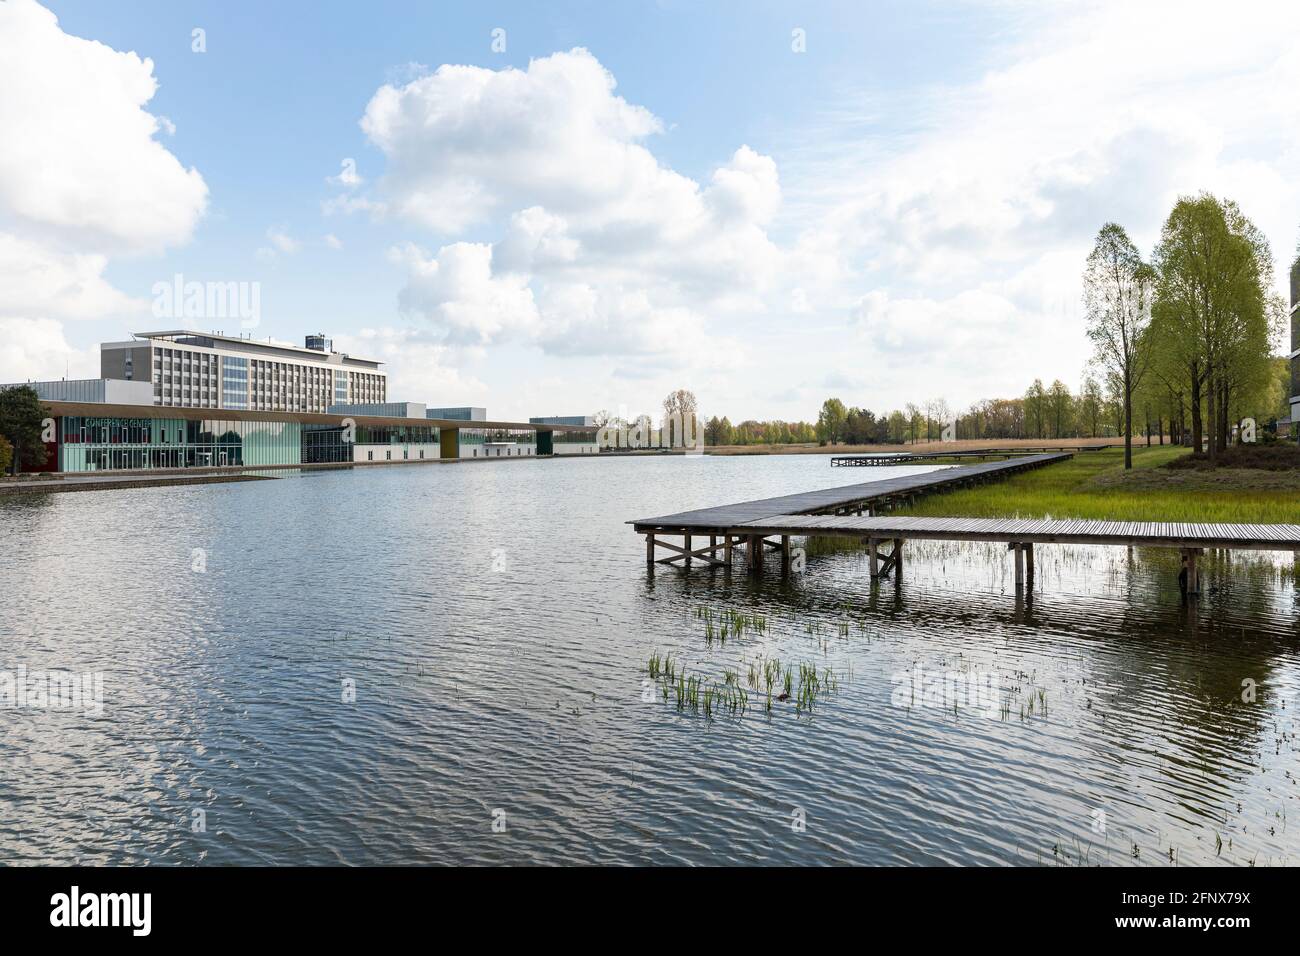 Eindhoven, The Netherlands, May 3rd 2021. The High Tech Campus, exterior buildings with the Philips headquarters, a lake and greenery on a sunny day d Stock Photo